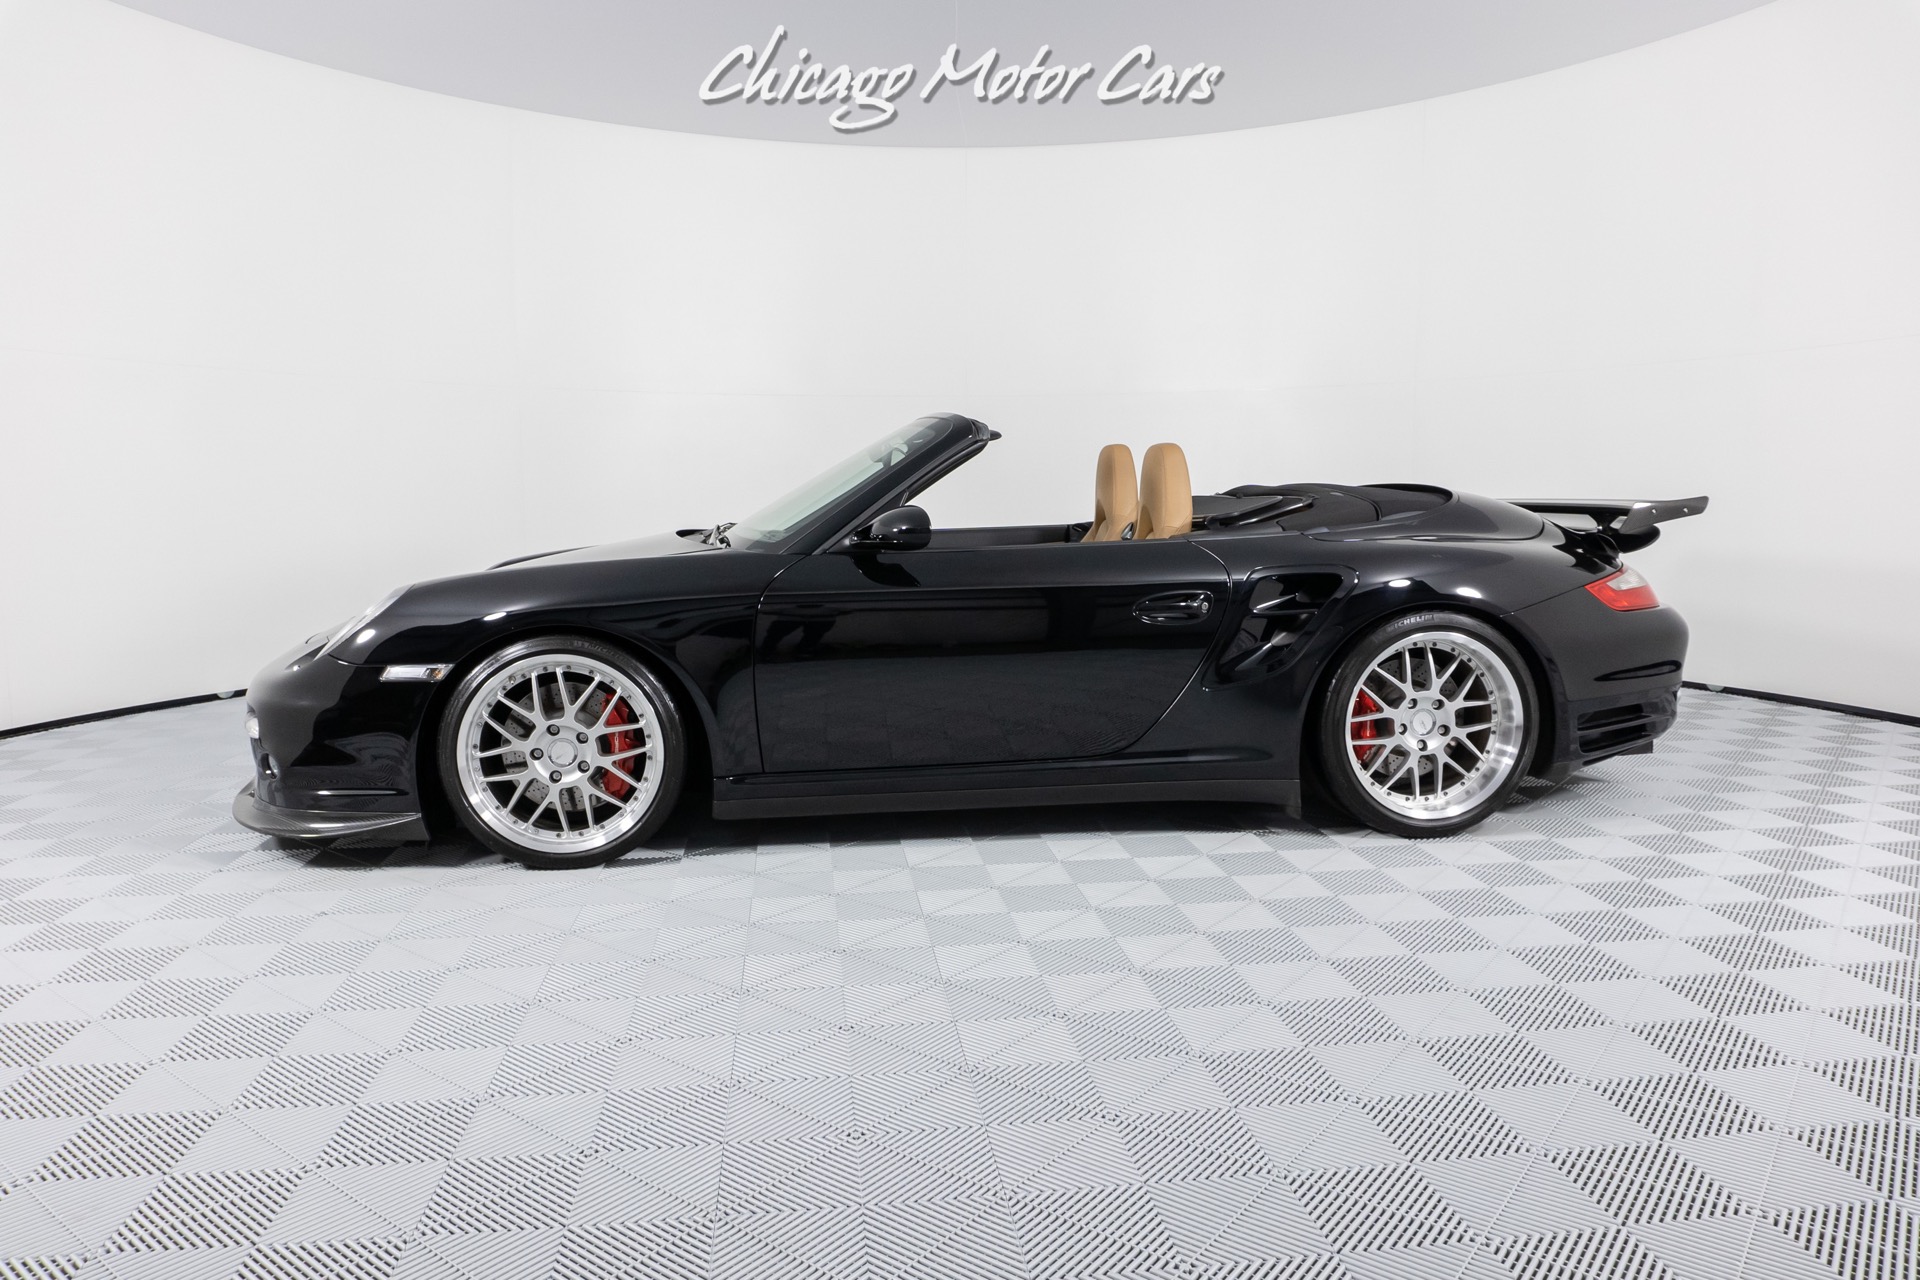 Used-2009-Porsche-911-Turbo-Convertible-UPGRADED-TURBOS-CARBON-FIBER-EXTERIOR-PACKAGE-LOADED